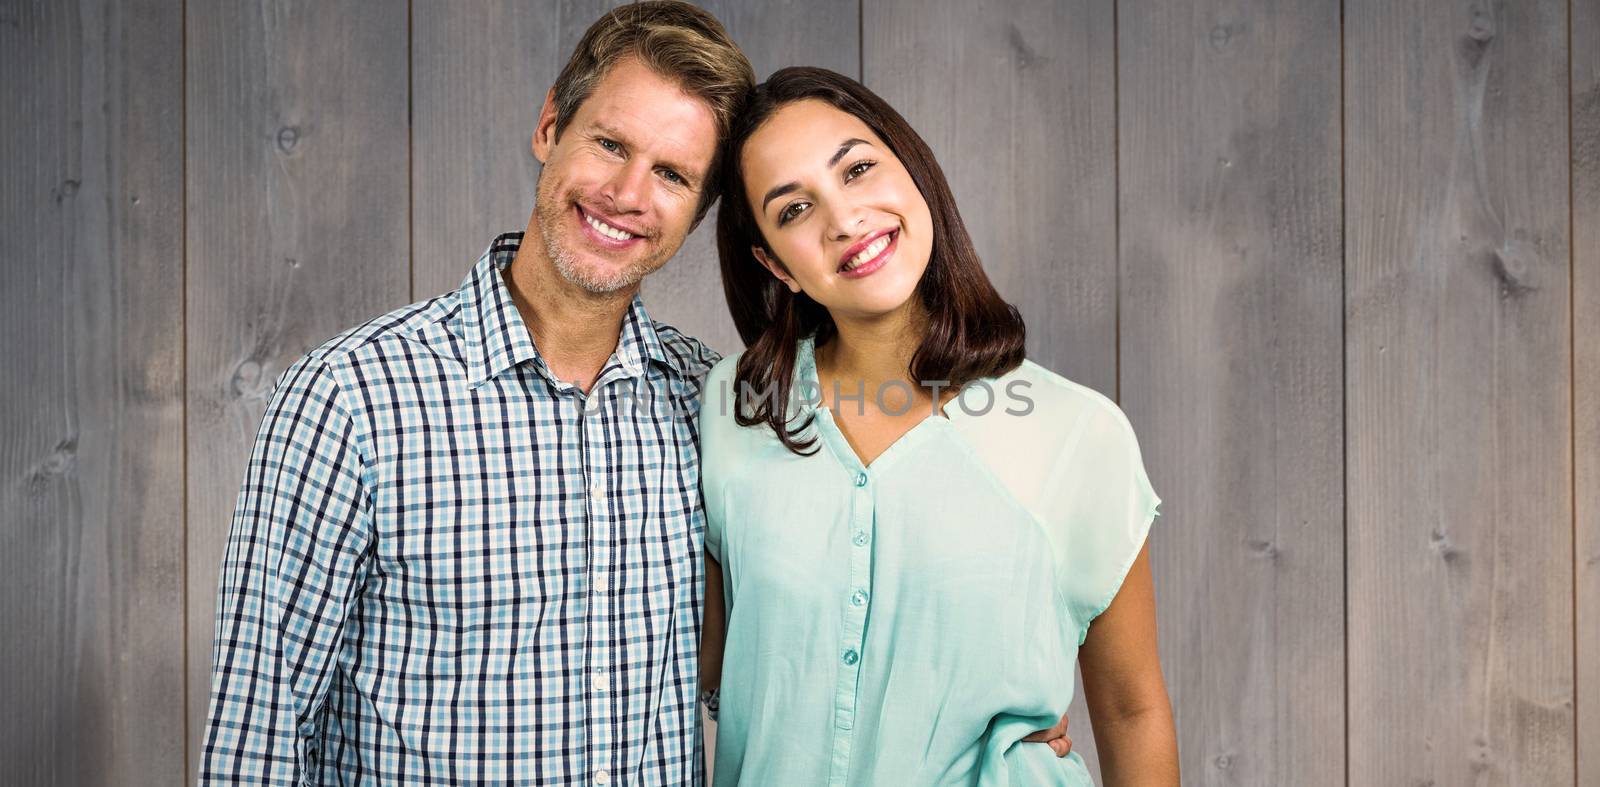 Portrait of happy couple standing against wooden planks